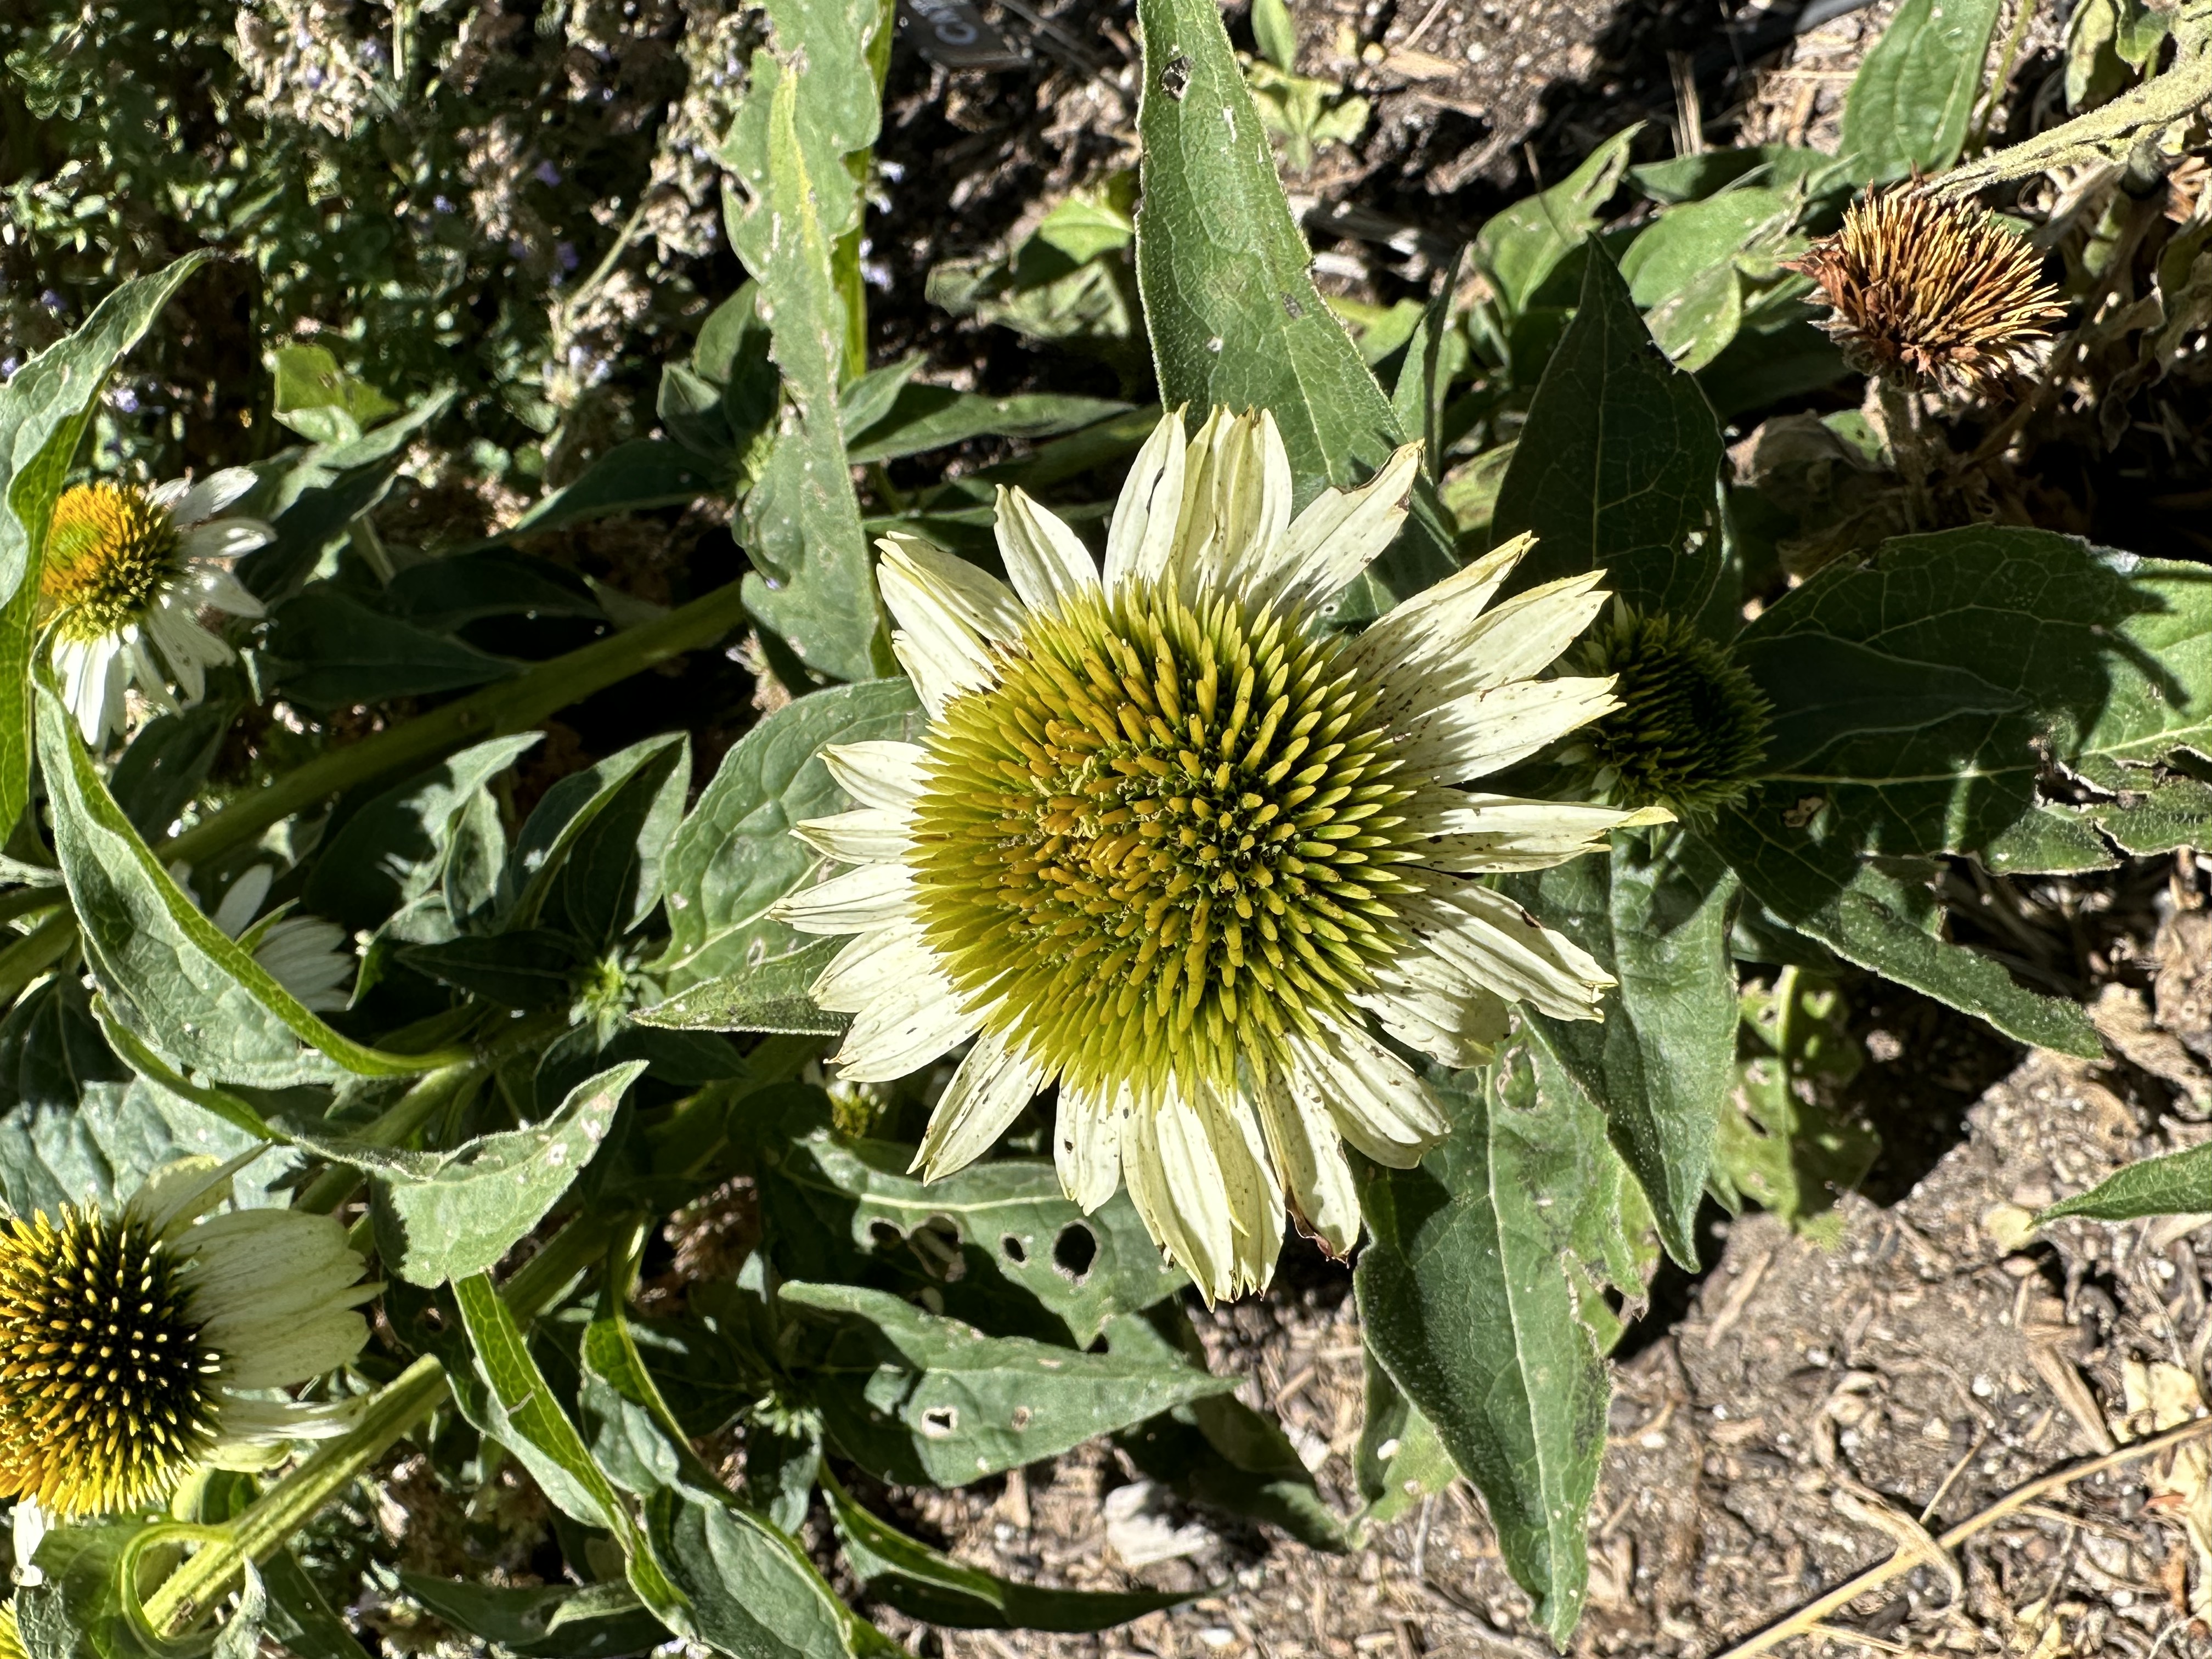 White Coneflower have white petals surrounding a spiky center.